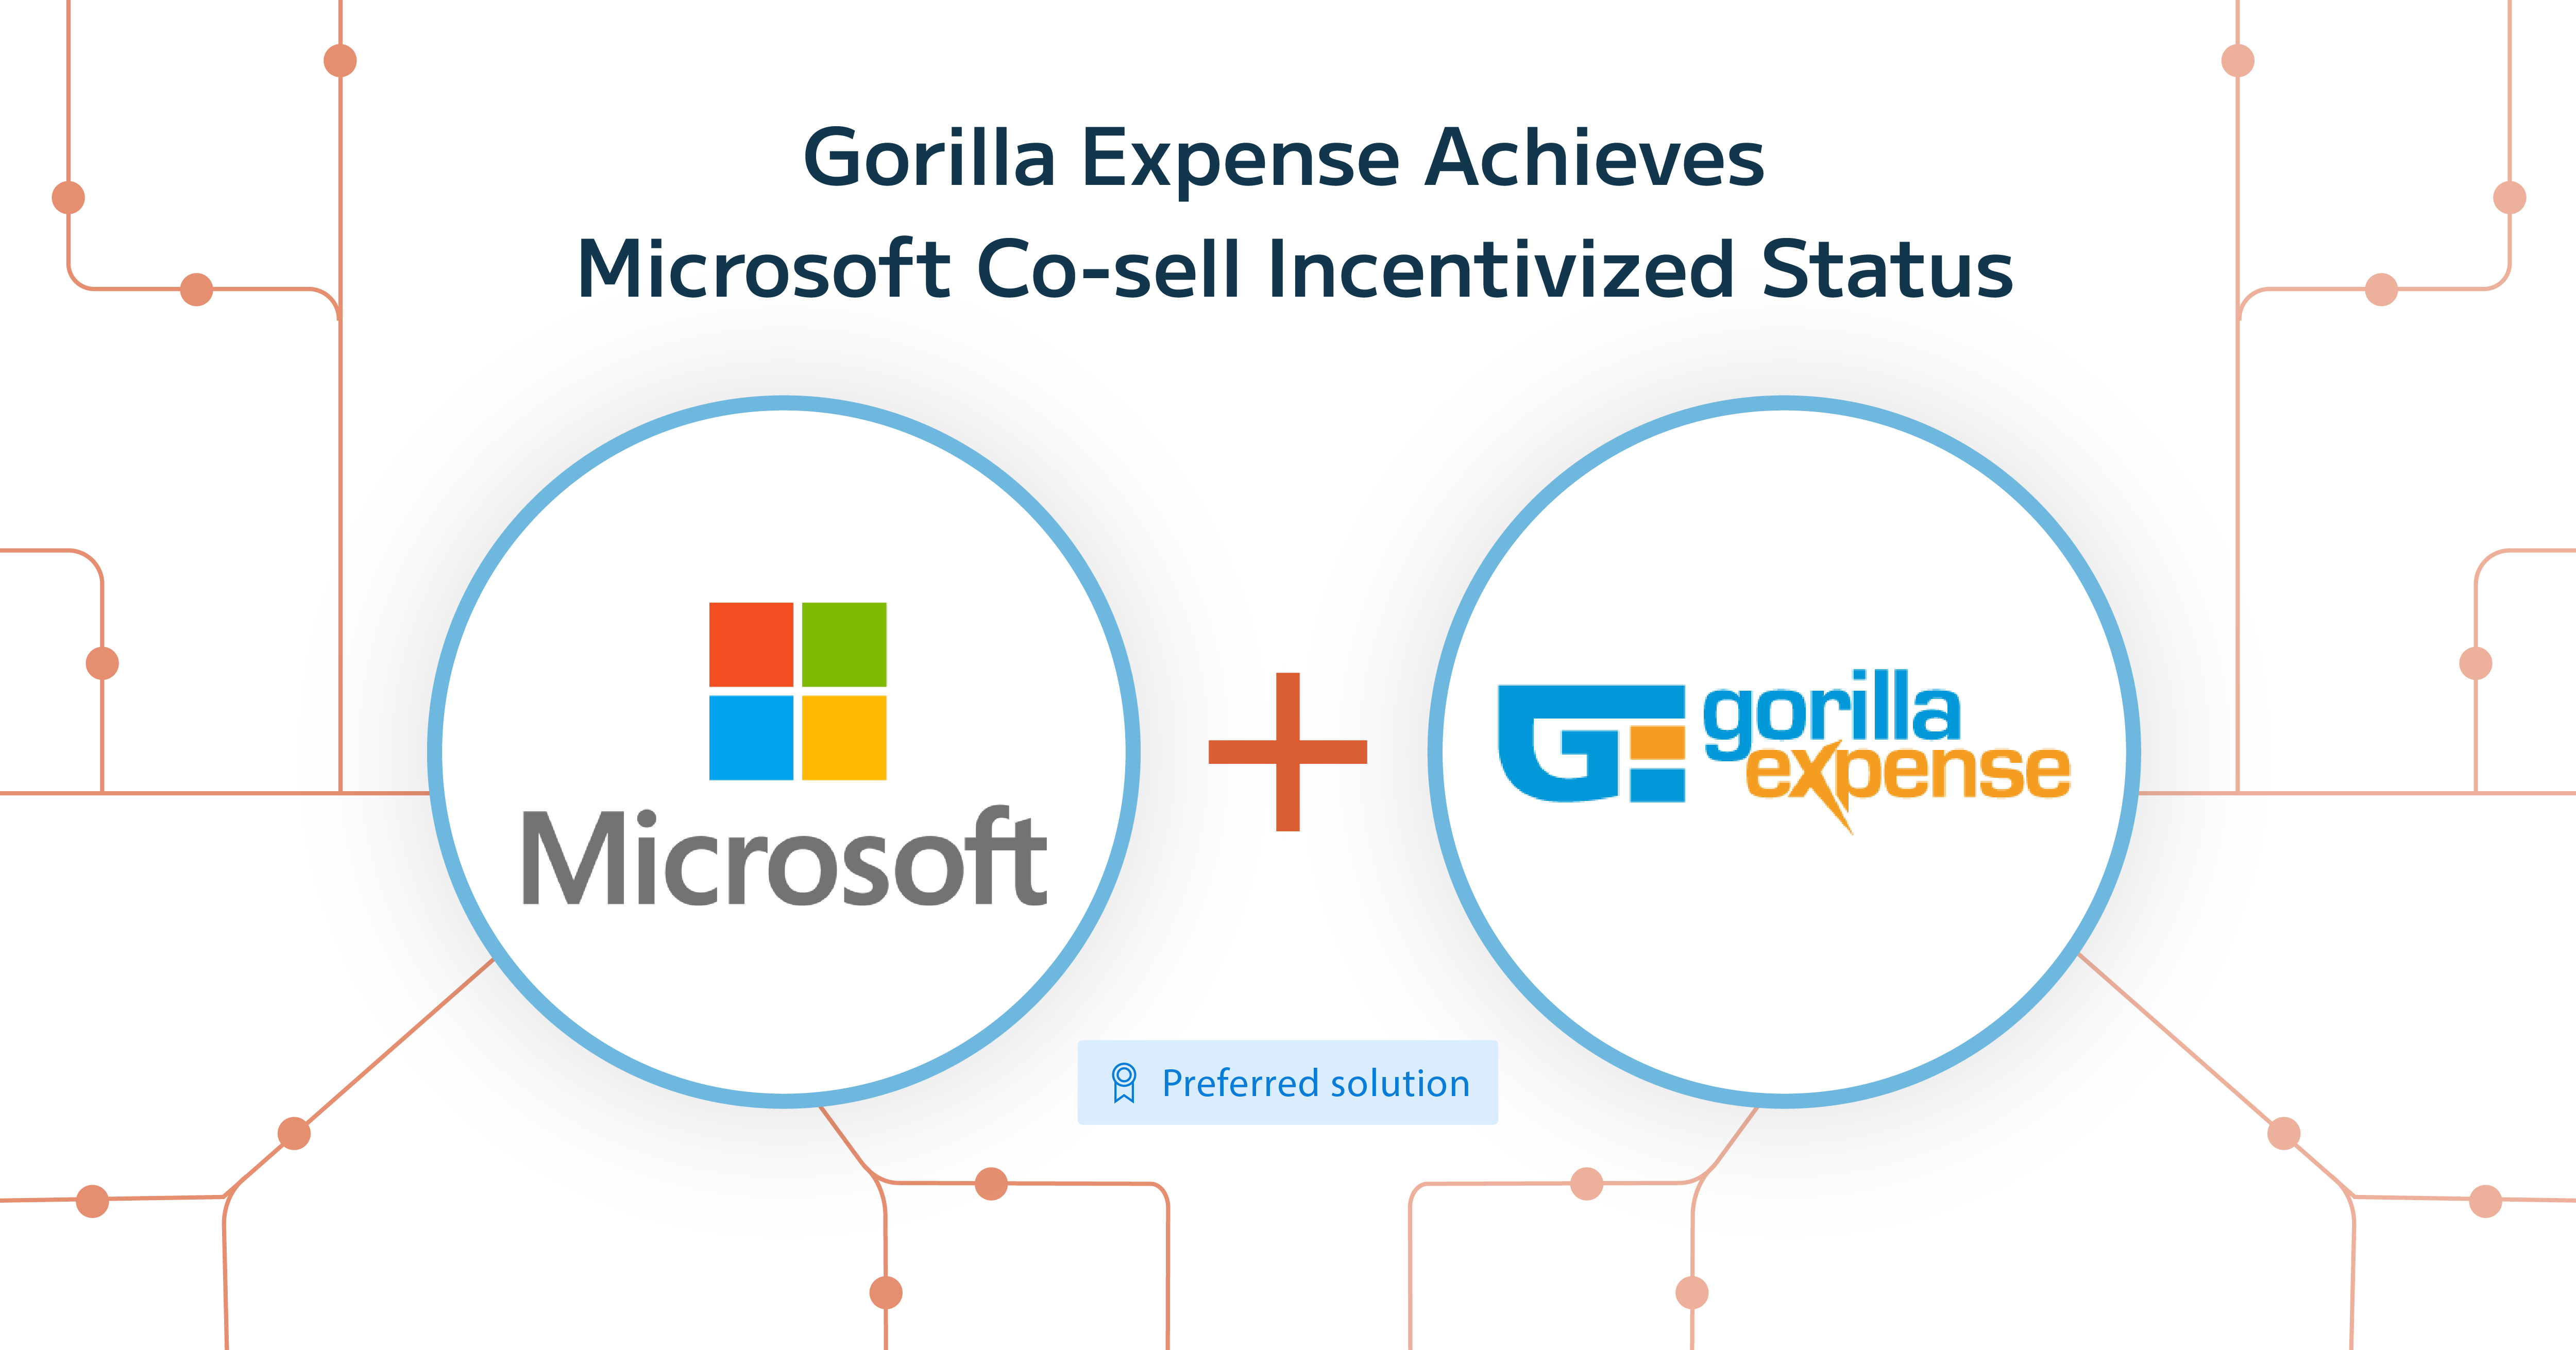 Gorilla Expense Achieves the Azure IP Co-sell Incentivised Status with Microsoft